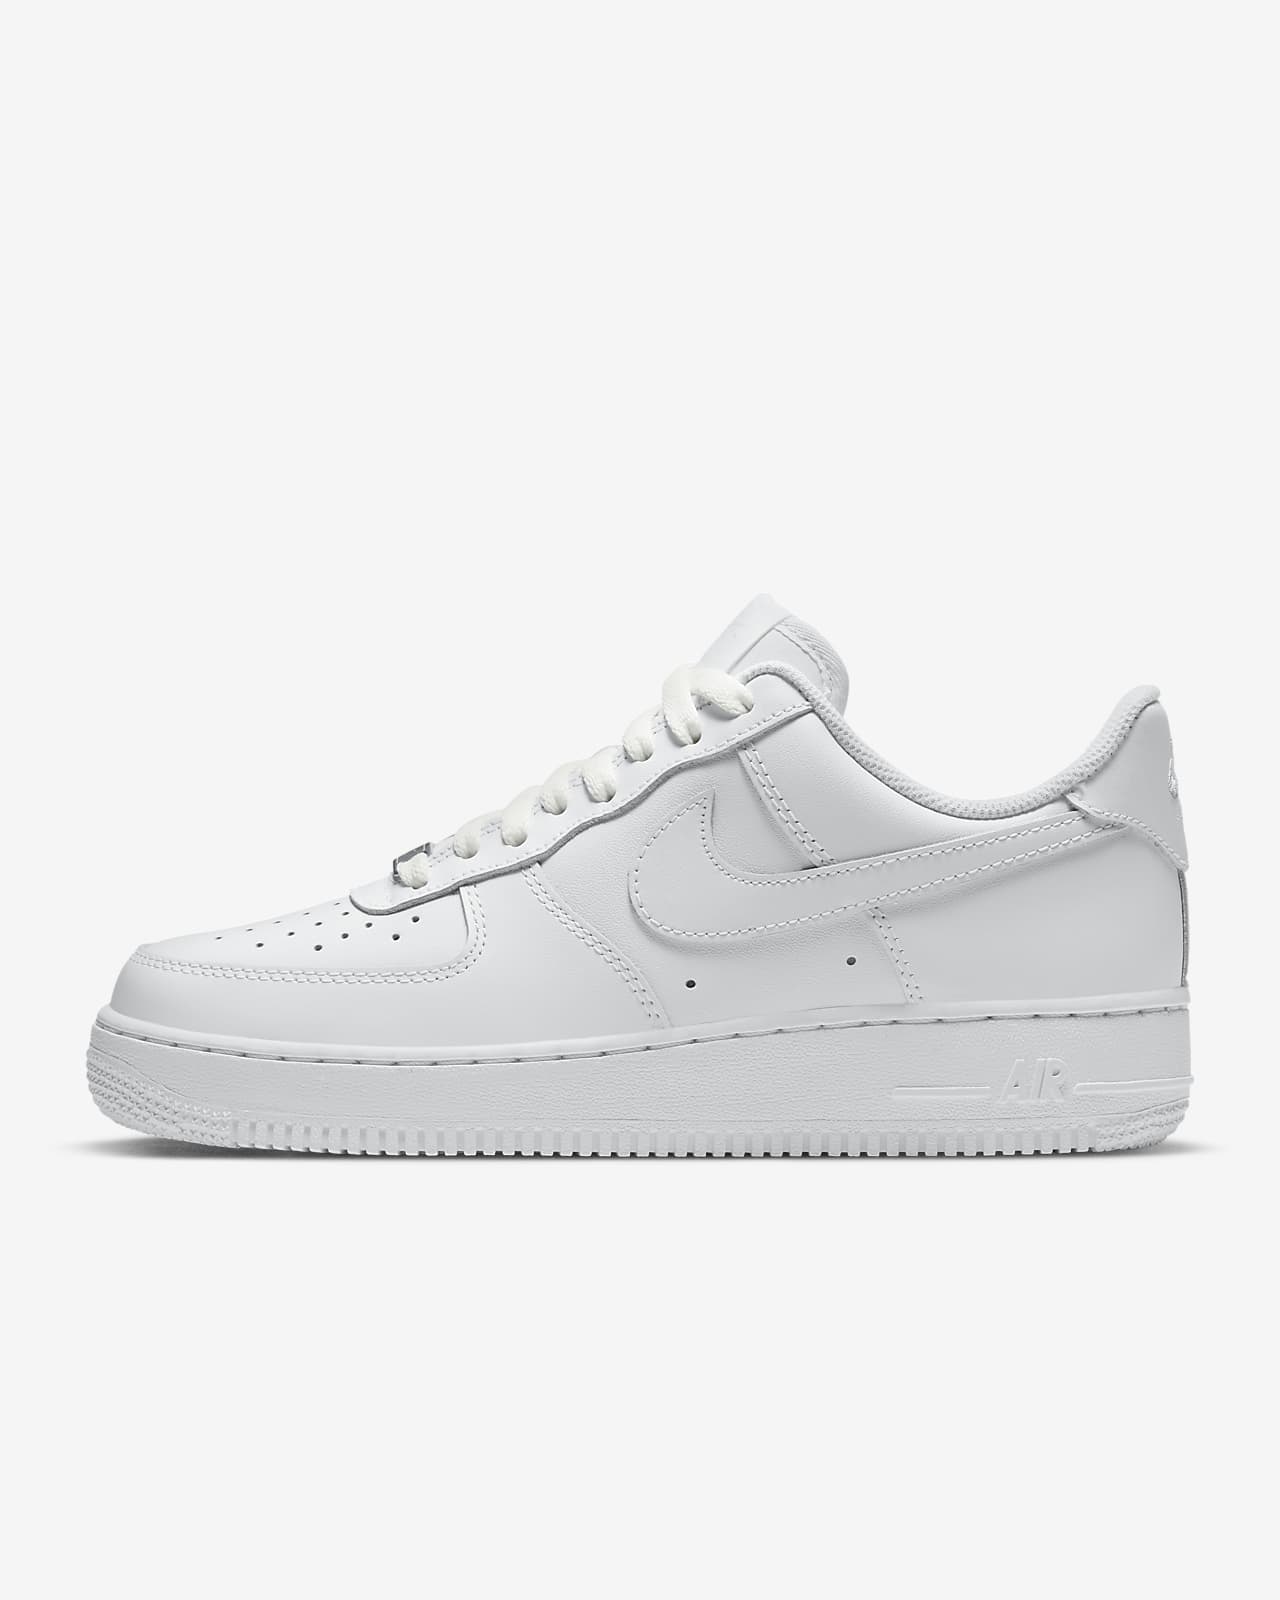 Impossible somewhere Employer Nike Air Force 1 '07 Women's Shoes. Nike.com